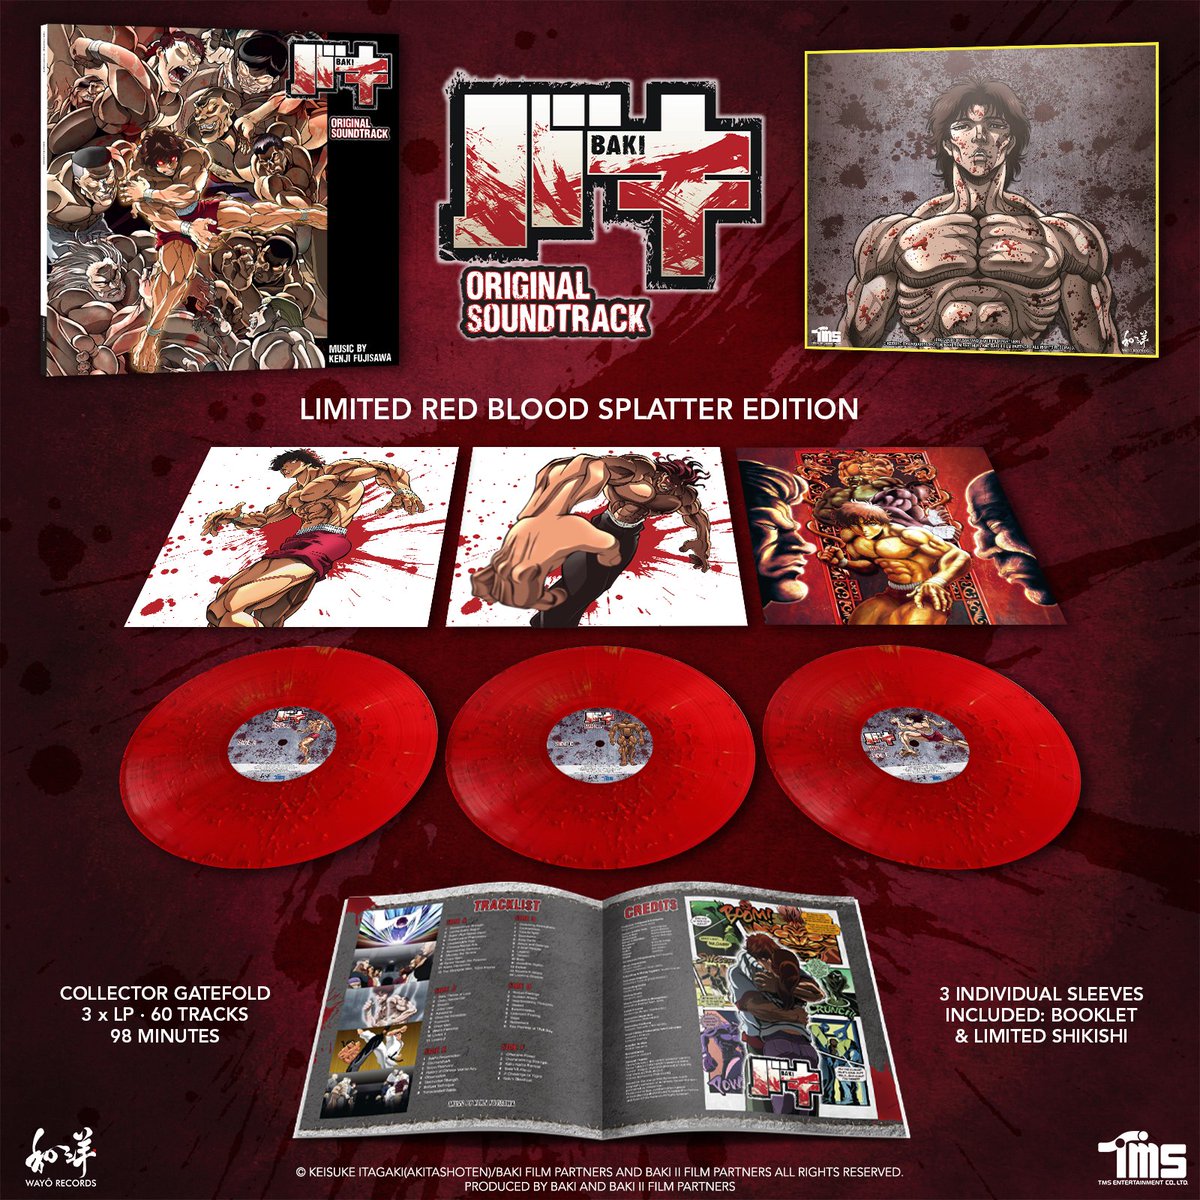 Let the battle begin👊 Here is the incredible BAKI Original Soundtrack, composed by Kenji Fujisawa (@TeamMaxStaff)! The limited 3xLP Edition features exclusive splatter discs and shikishi🔥 ➡️wayorecords.com/en/vinyls/832-… #Baki #Vinyl #OST #Anime